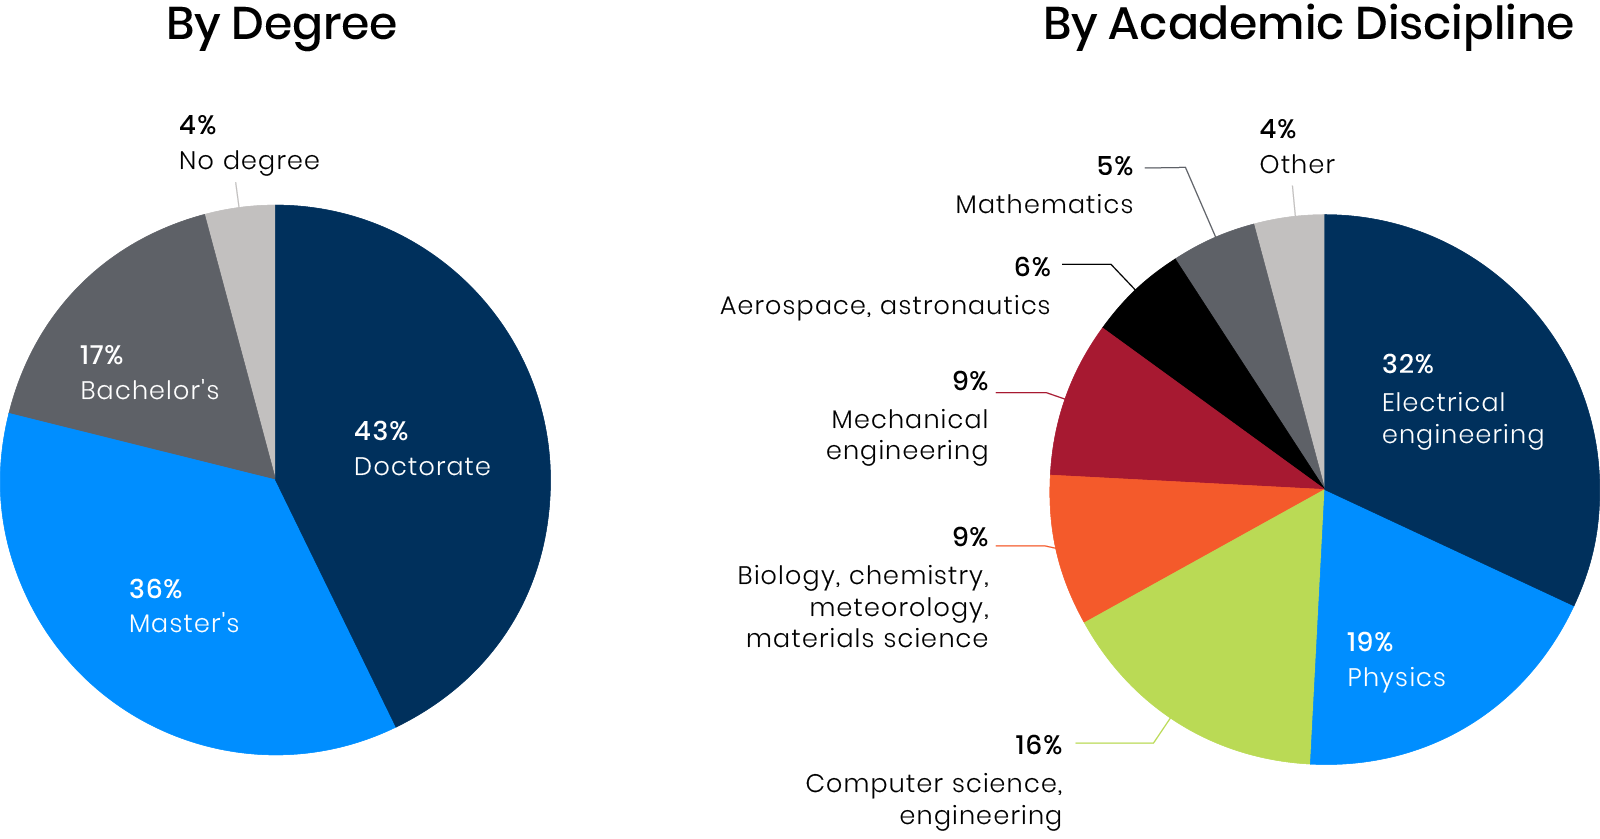 composition pie charts of professional staff by degree and academic discipline